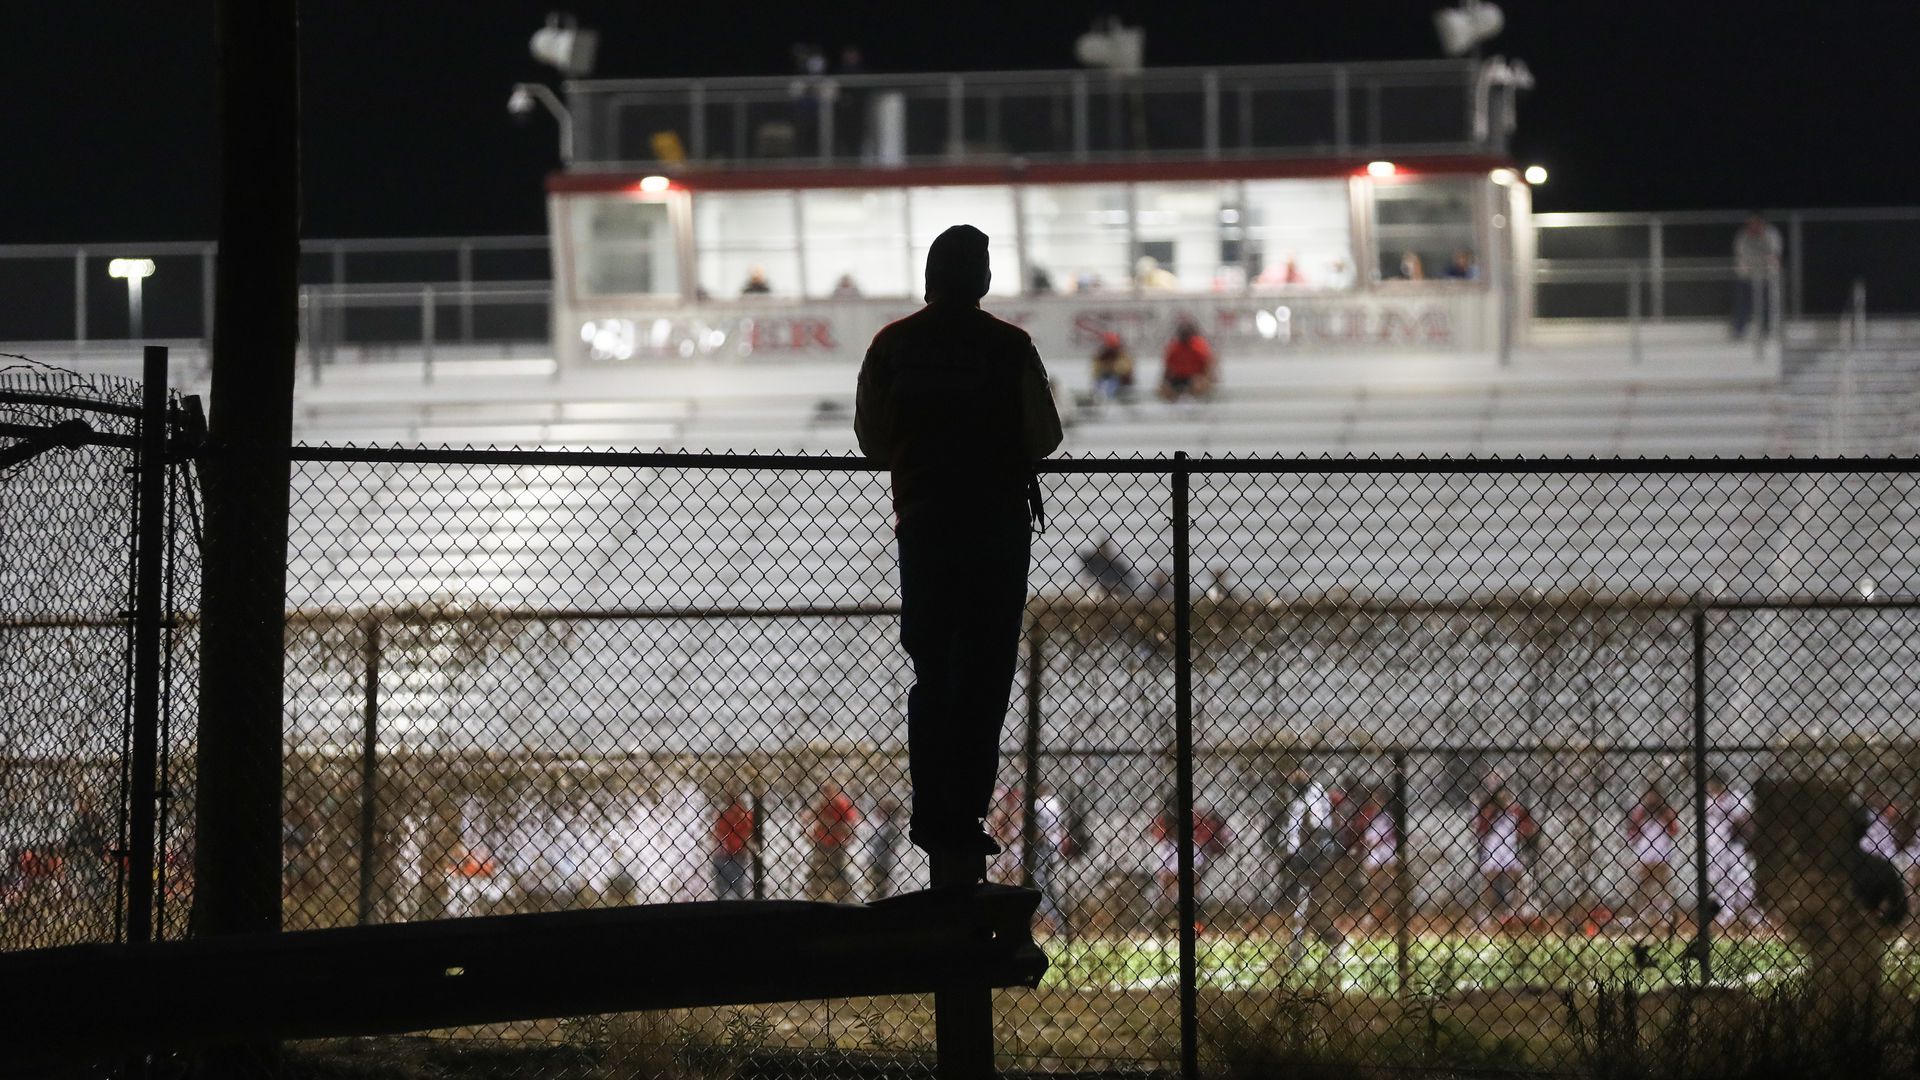 Picture of a person standing behind a fence looking into a football field